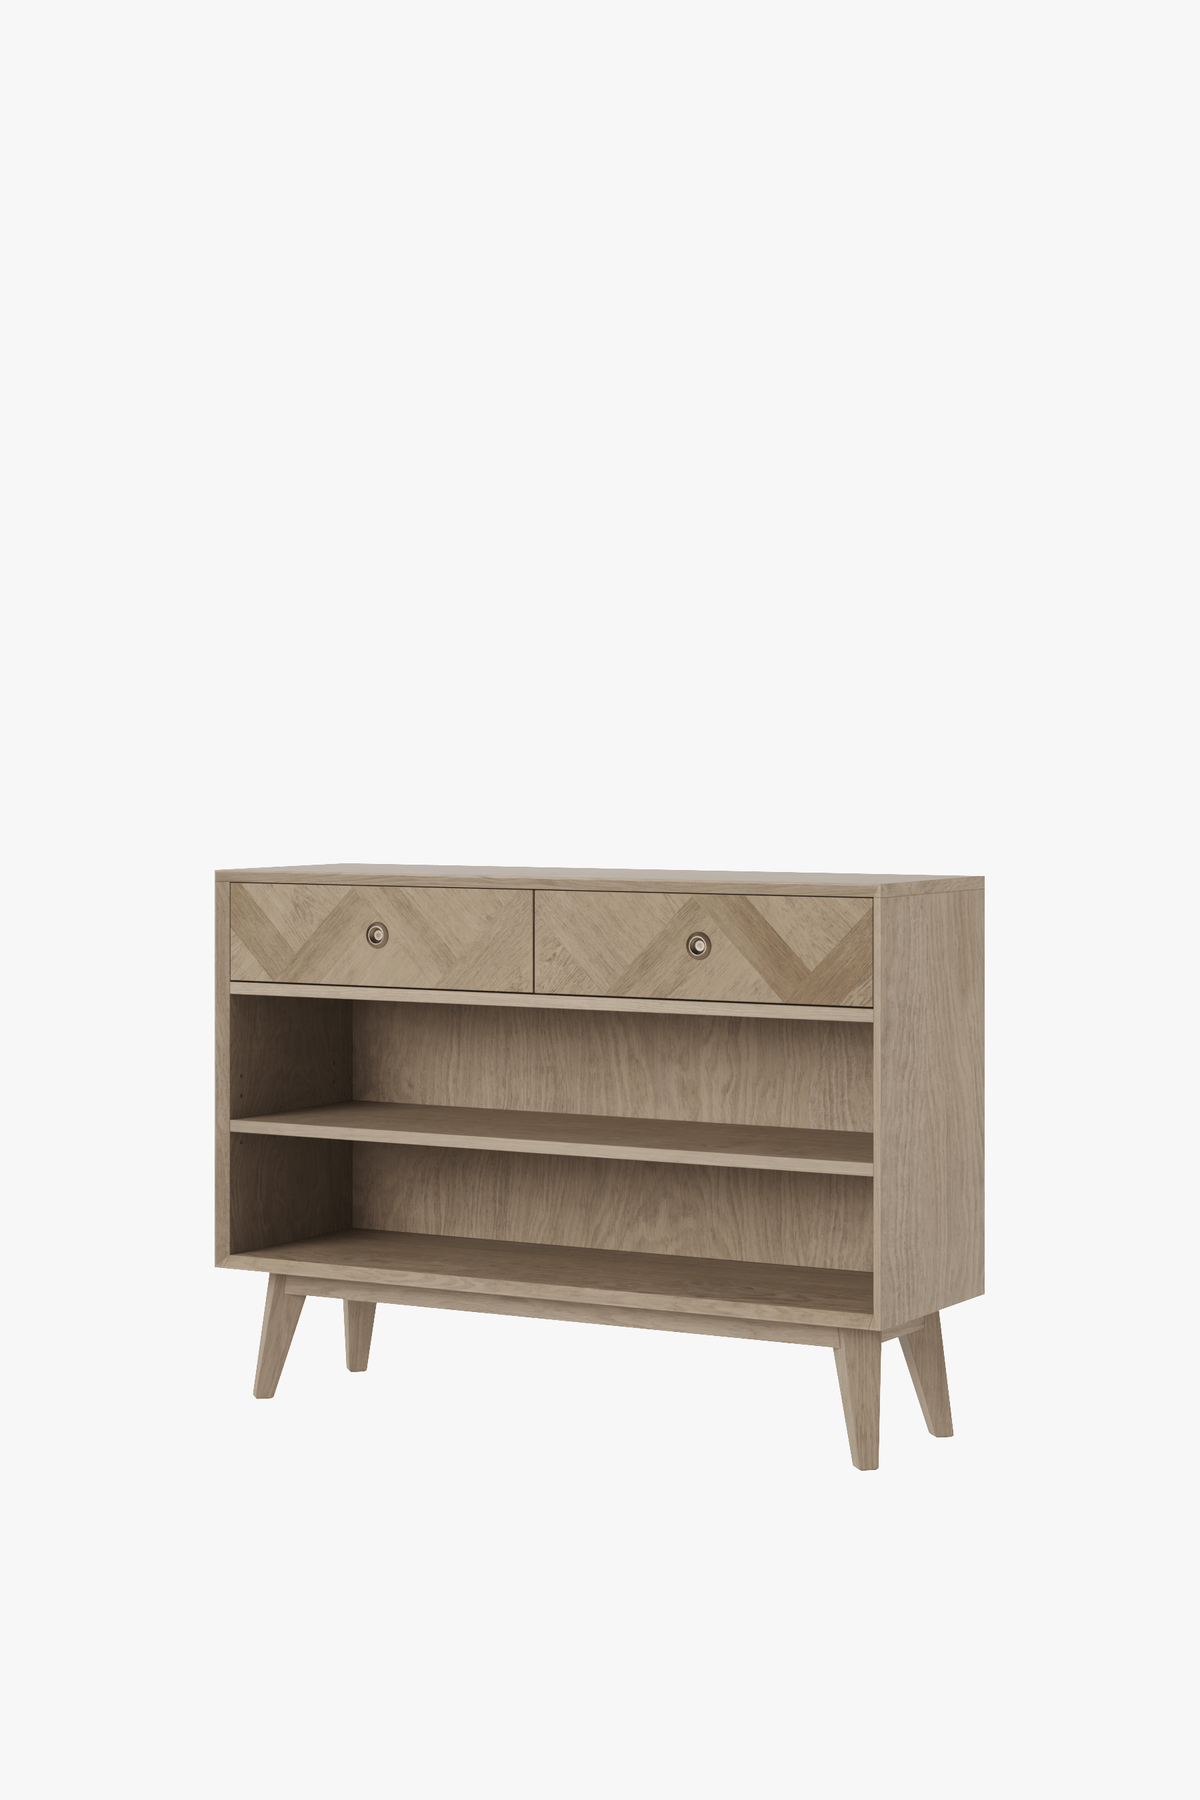 Hencroft 2 Drawer Console Table